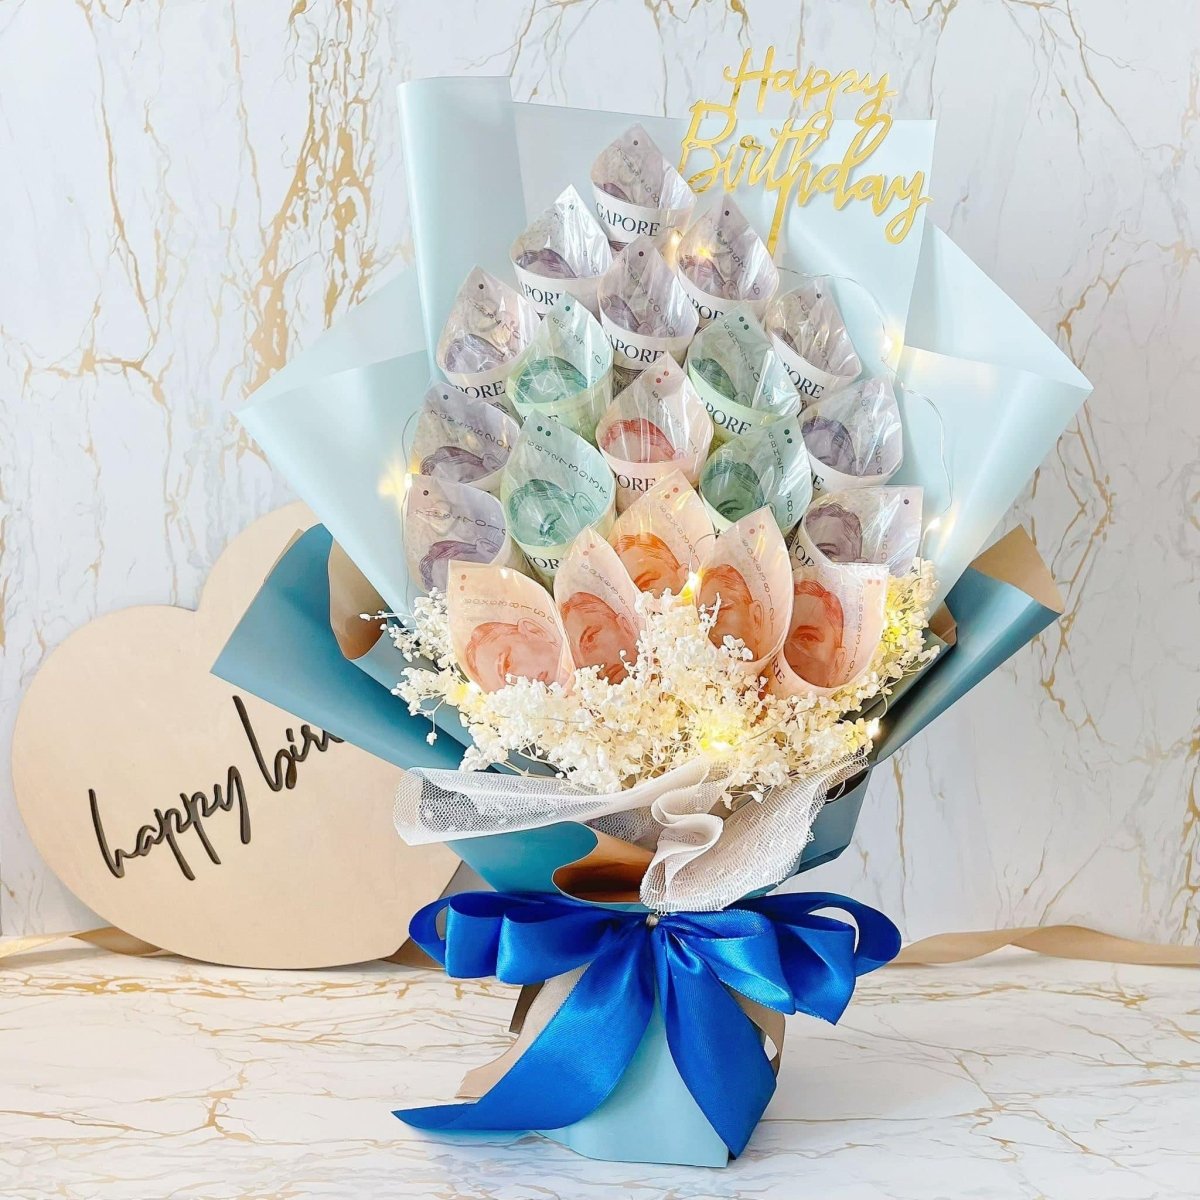 $100 Dollar Thoughts for HER - Luxury Cash Money Bouquet(1 Day Pre